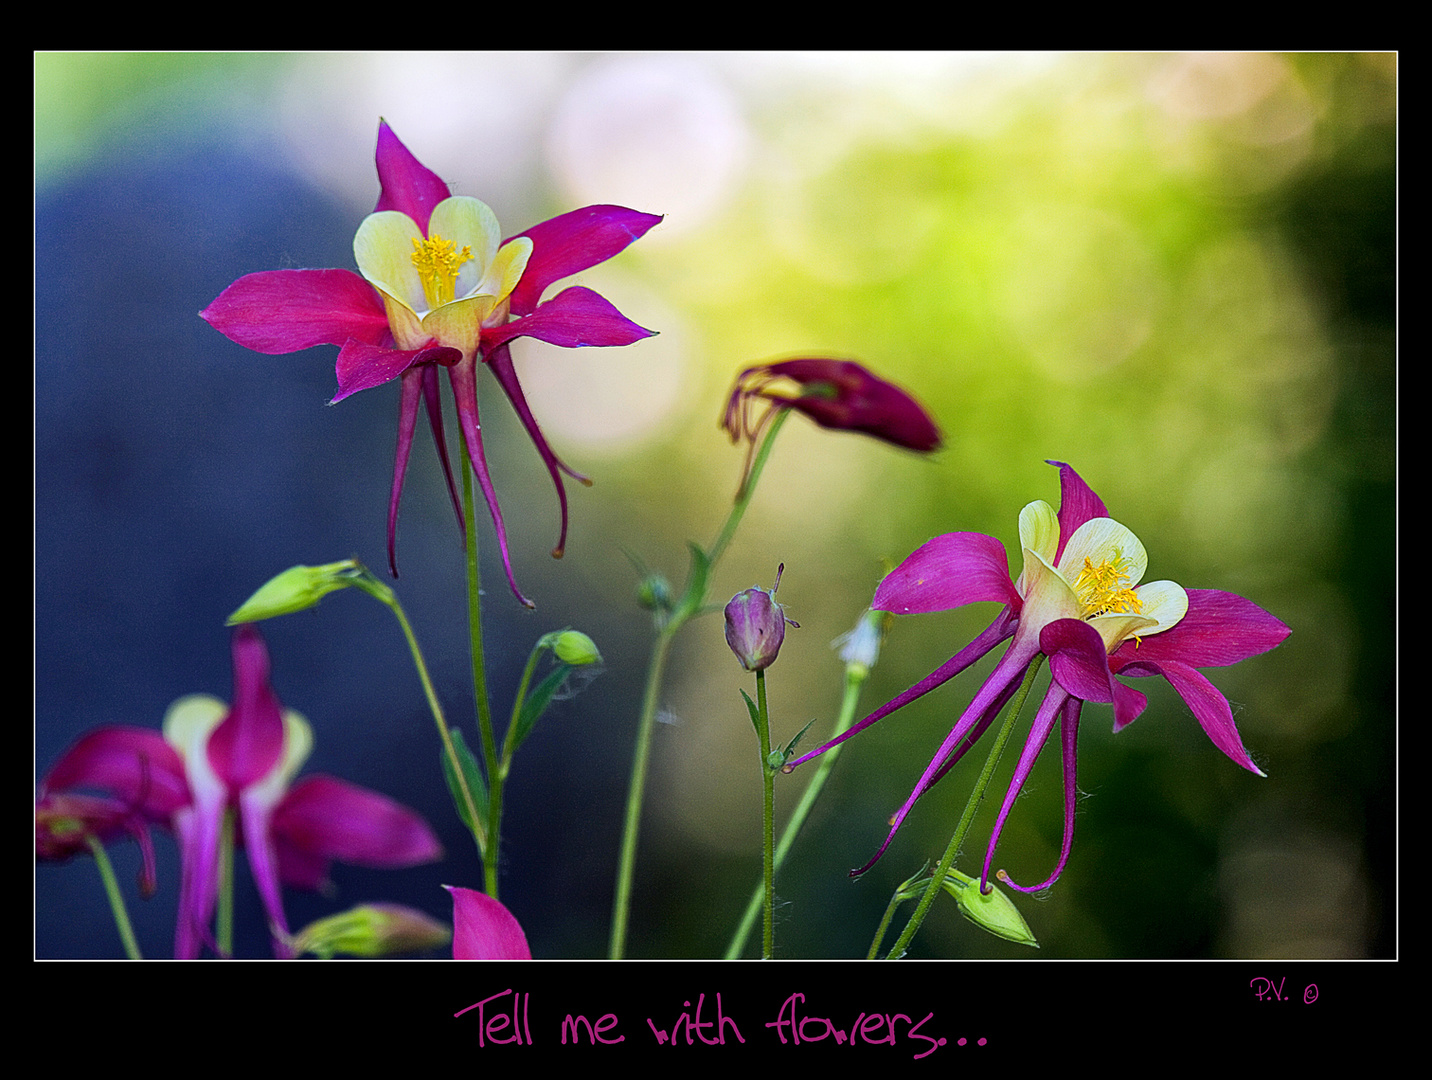 Tell me with flowers...